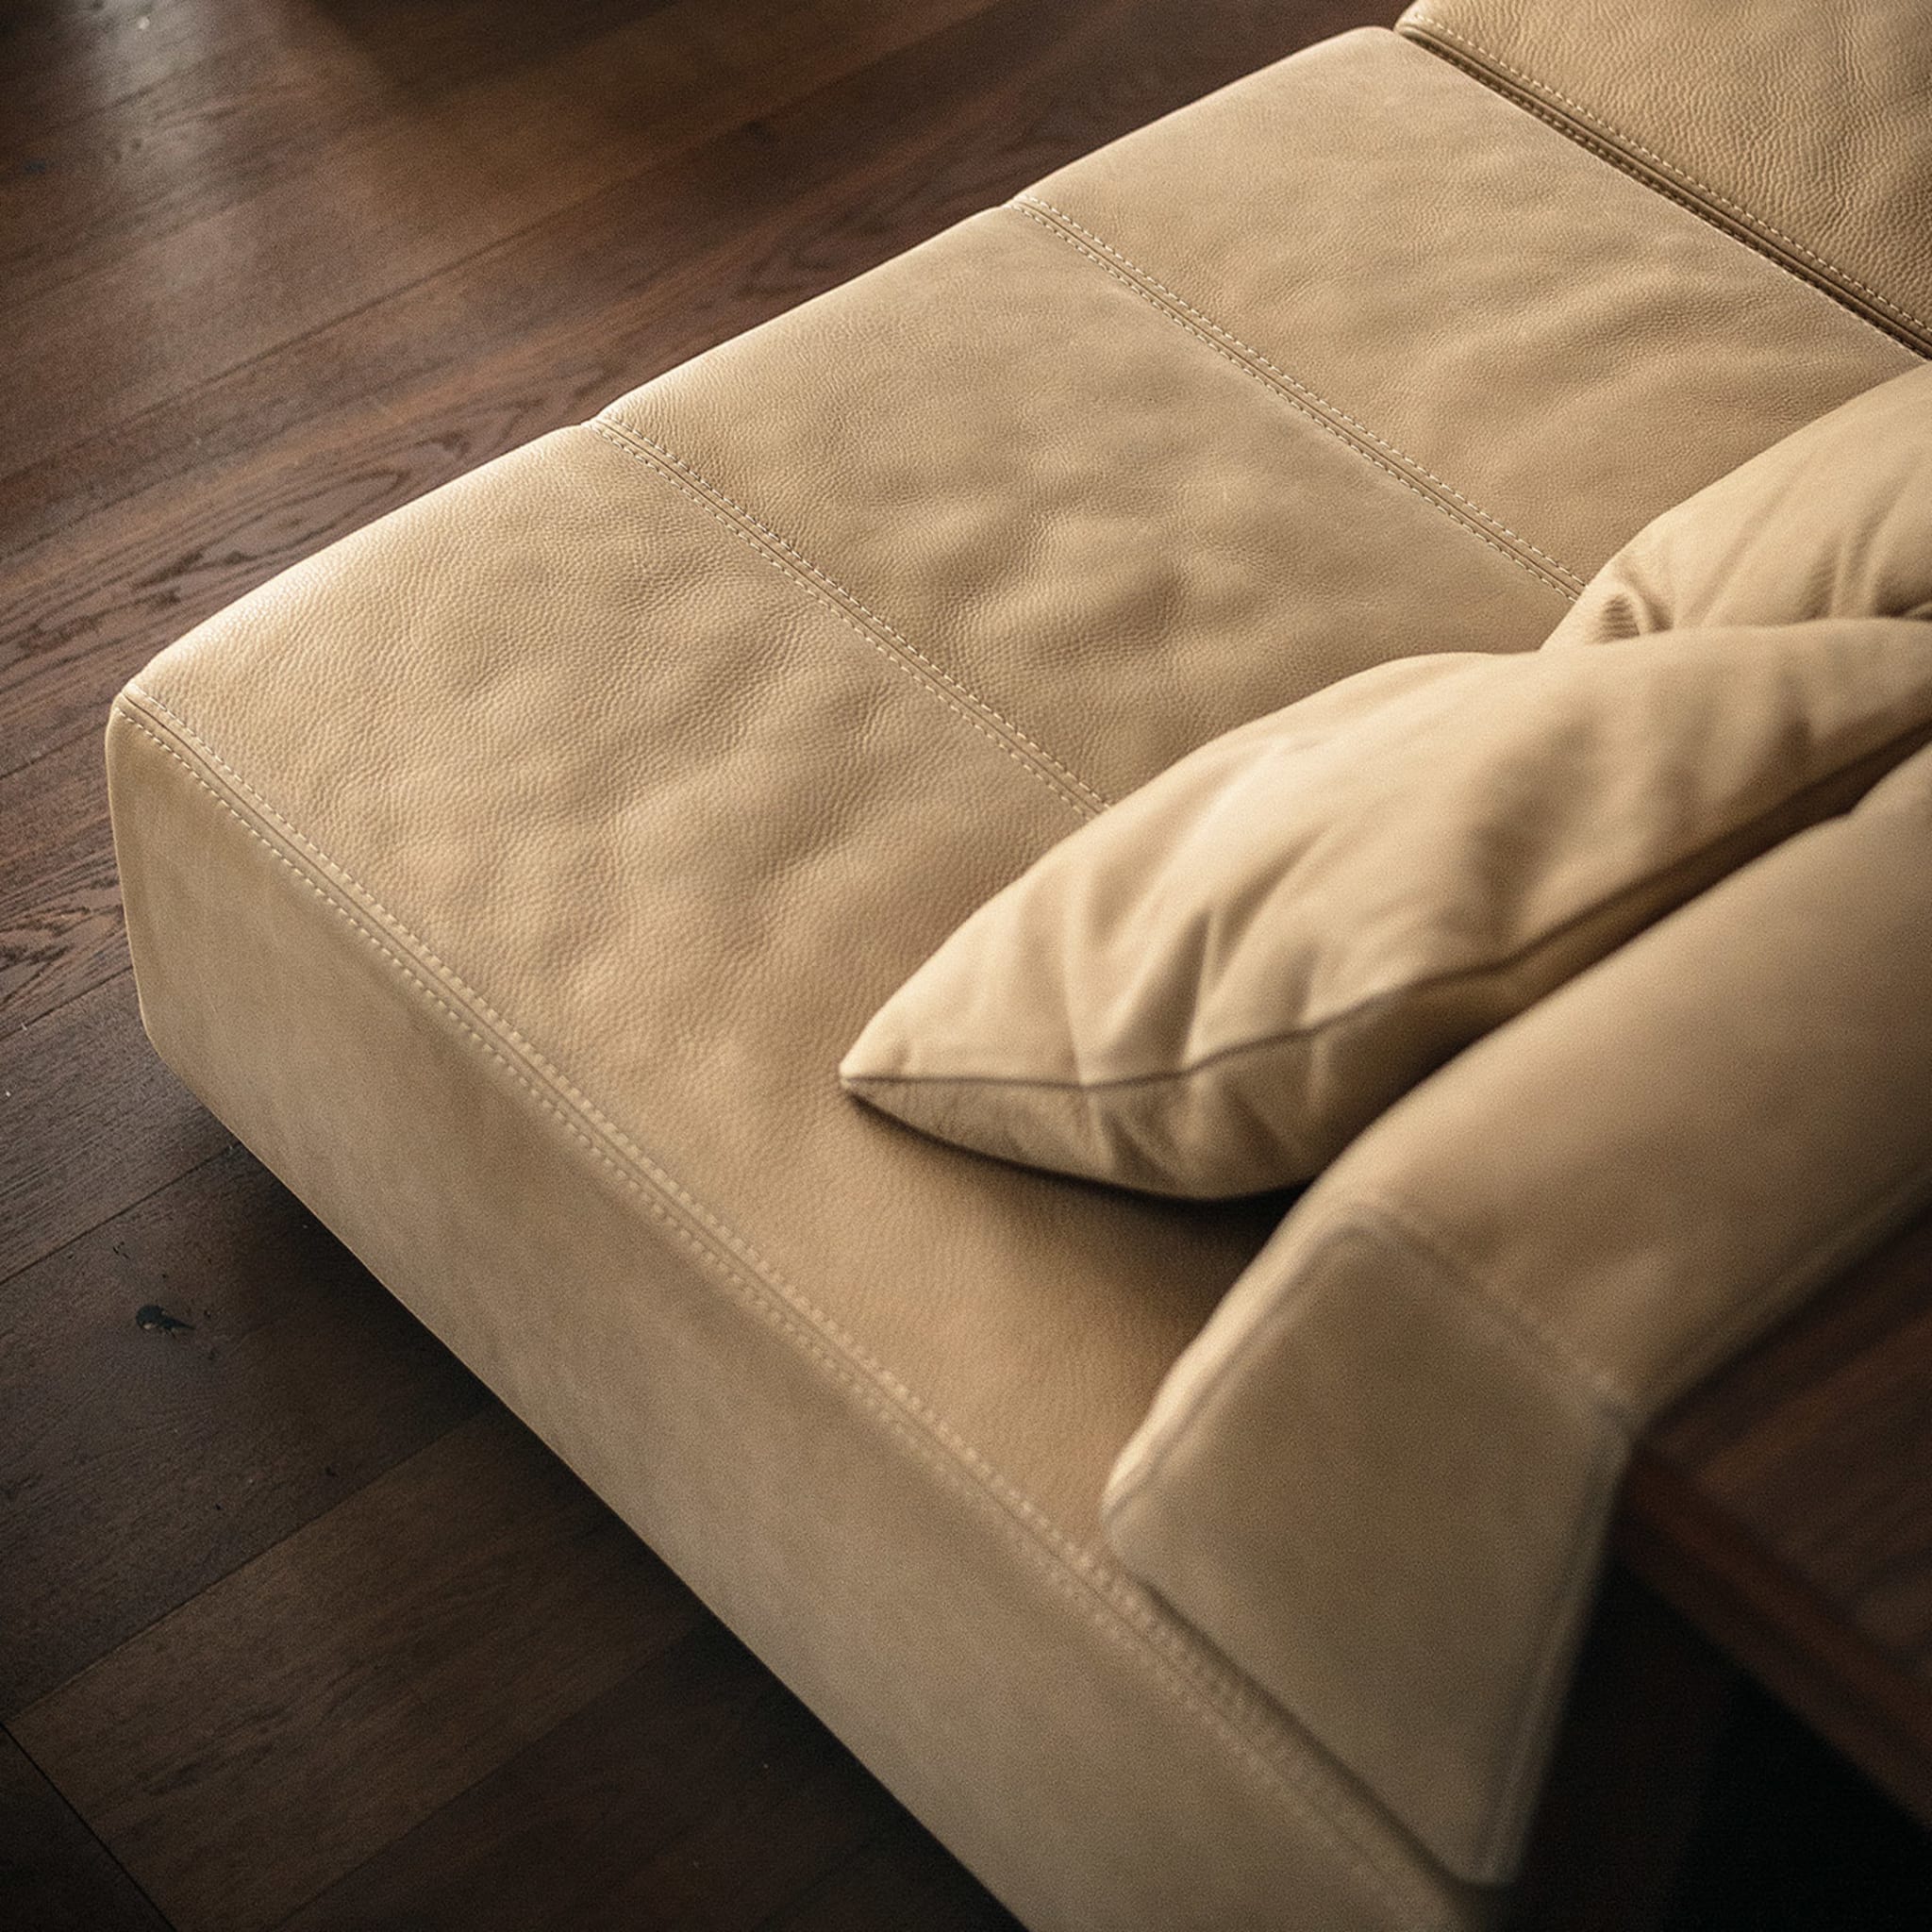 Fur Nature Brown Sofa by Jamie Durie - Alternative view 3